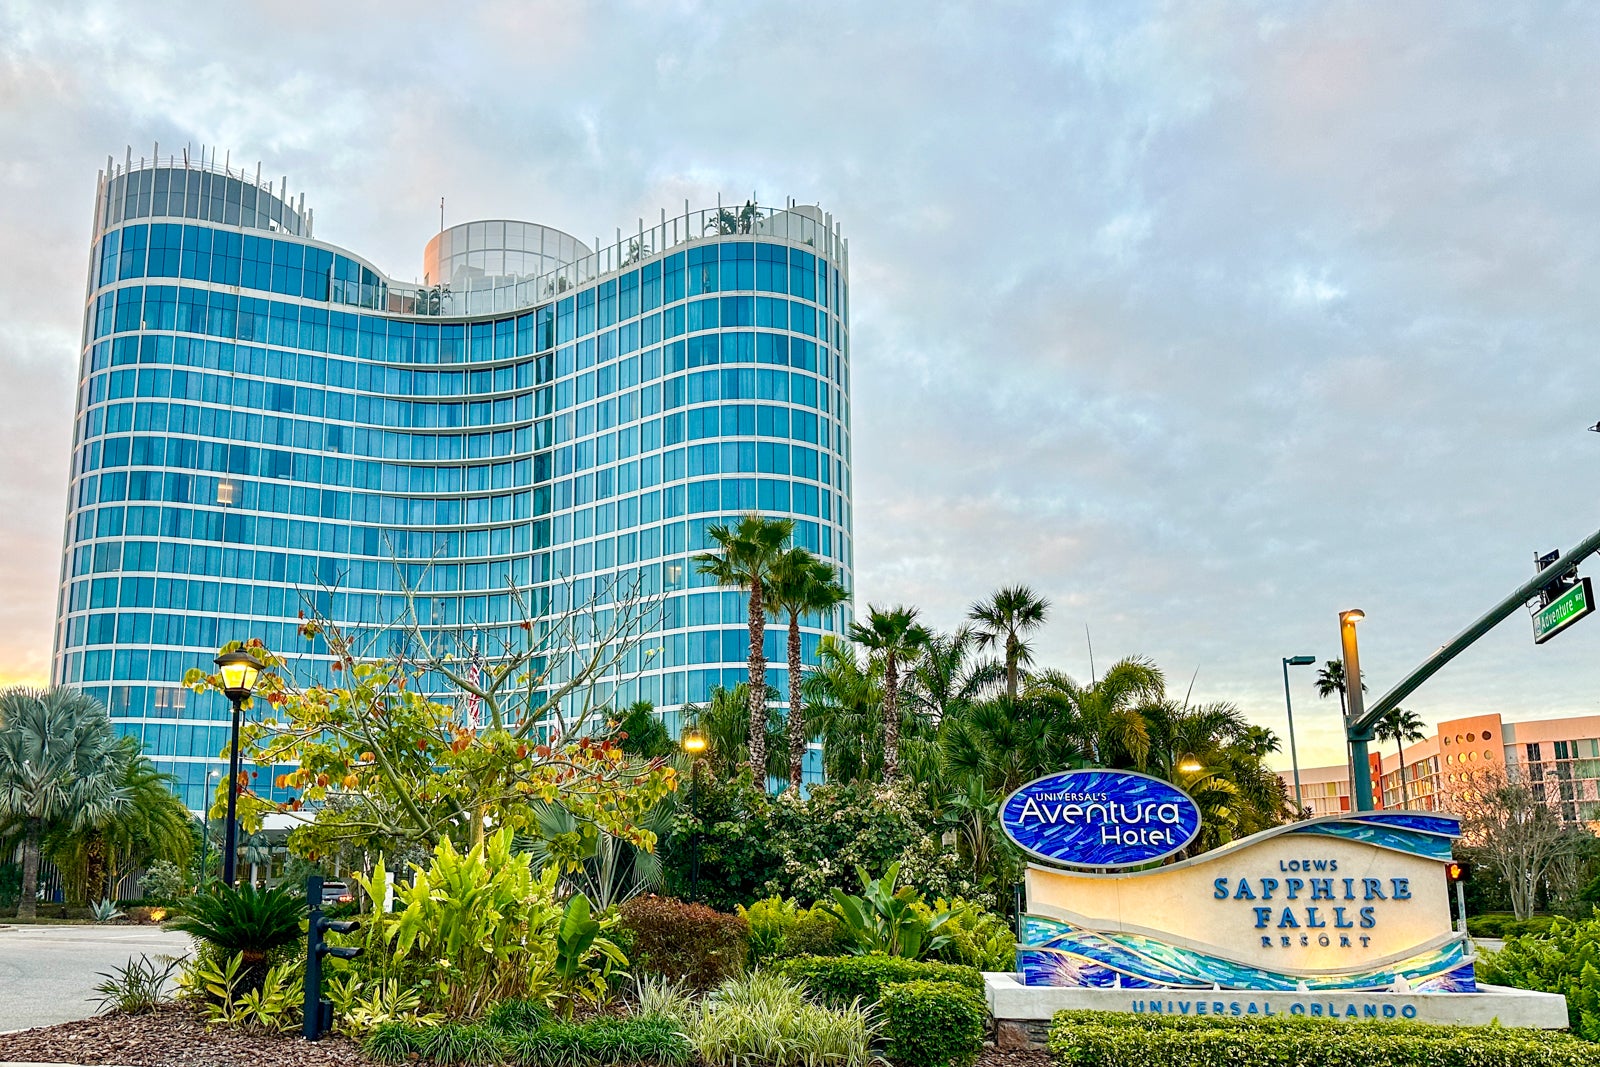 Sleek and modern, yet affordable: A review of Universal's Aventura Hotel